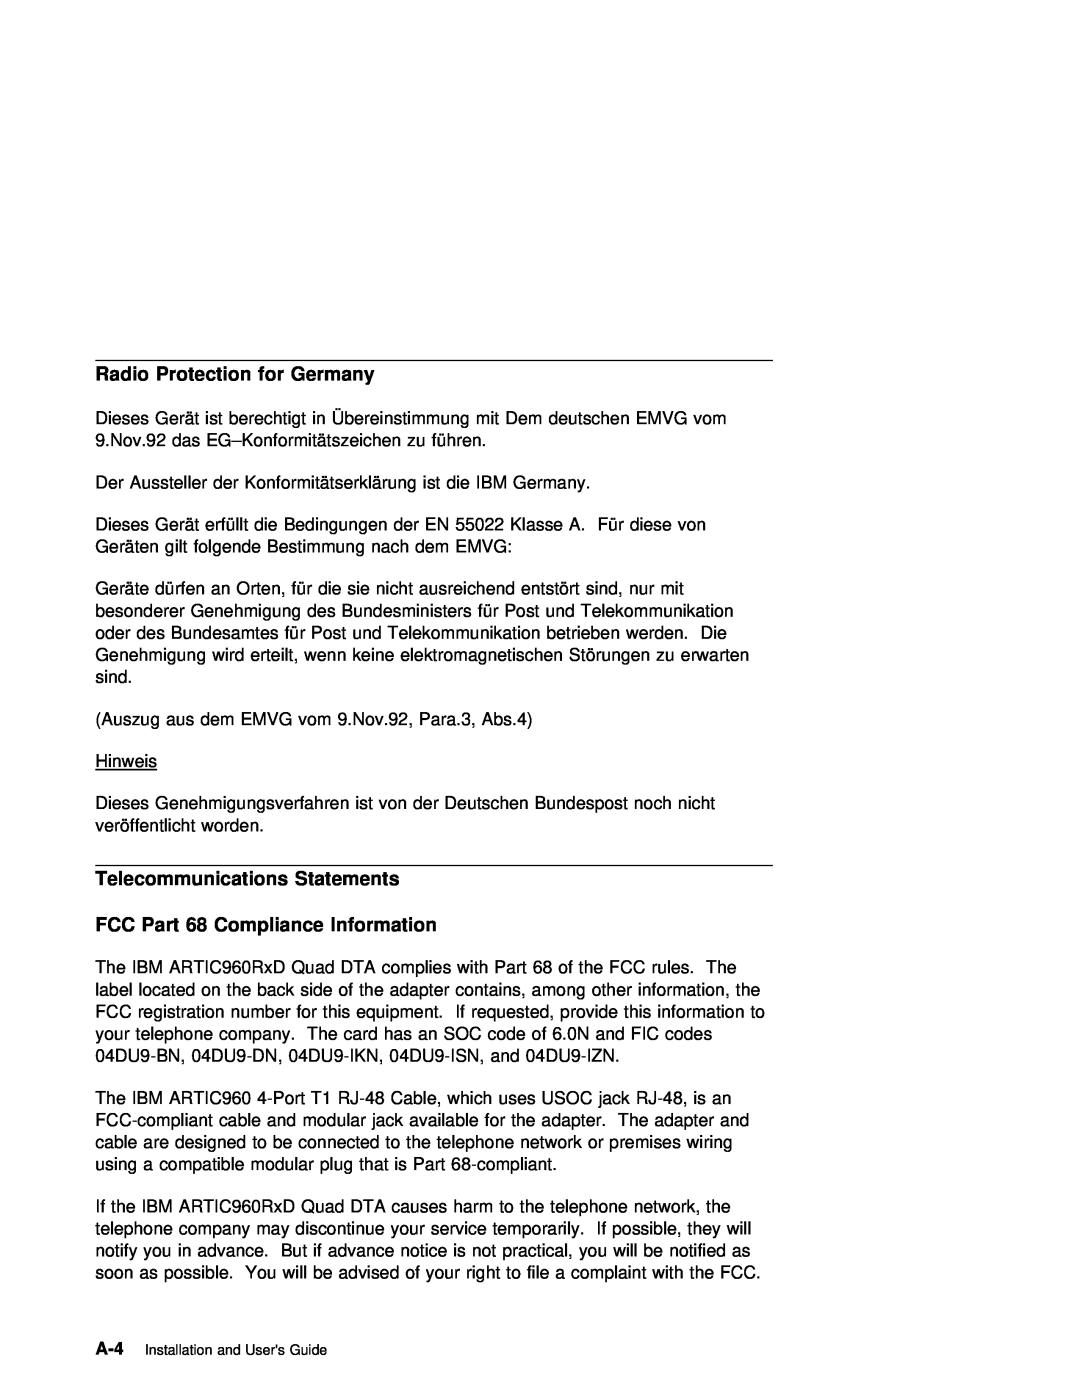 IBM ARTIC960RxD manual Radio Protection for Germany, Telecommunications Statements FCC Part 68 Compliance Information 